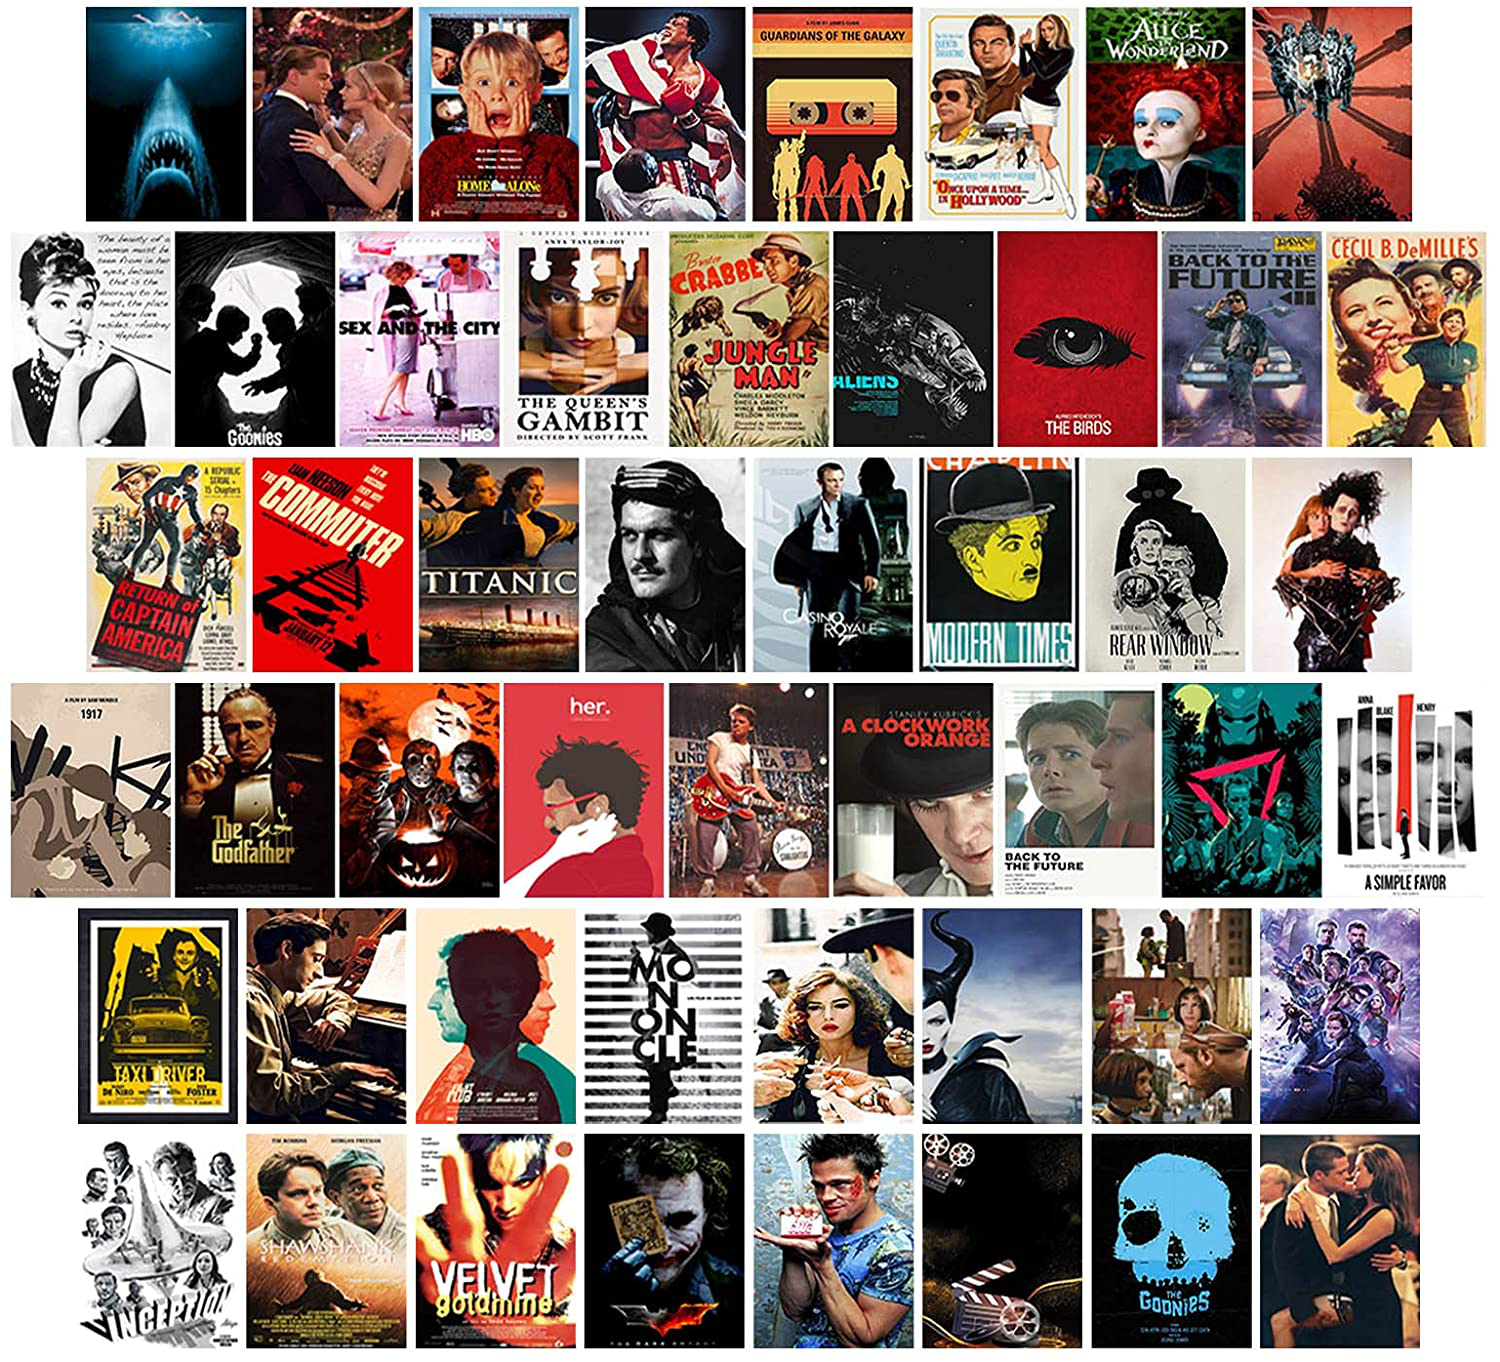 Aesthetic Movie Pictures Collage Kit for Wall Various Film Themed Posters for Teen Room Decoration